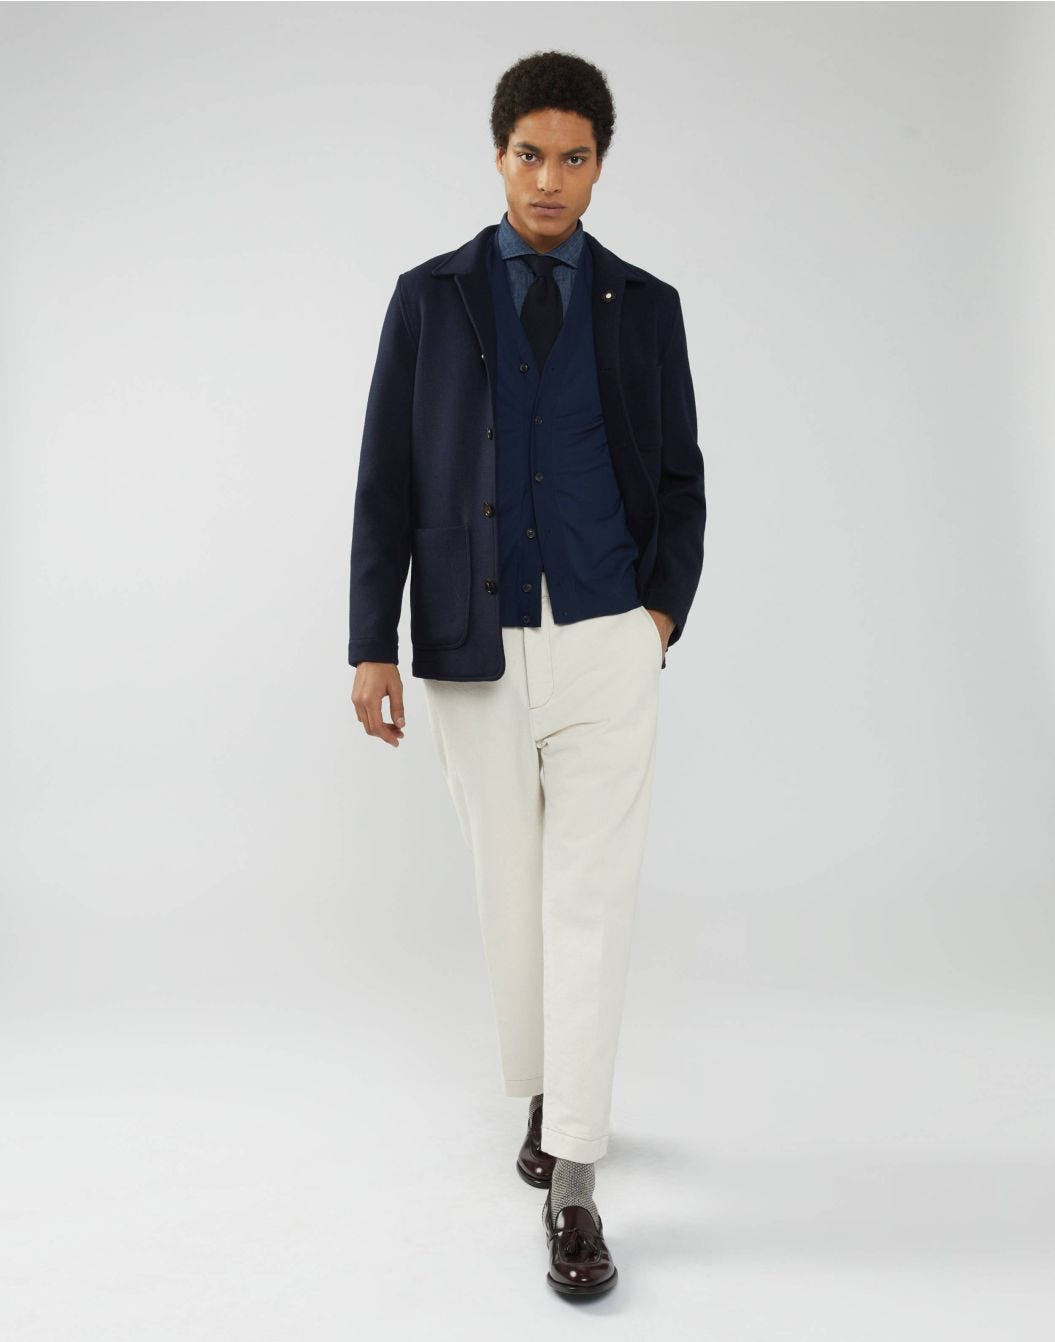 V-necked cardigan in blue worsted wool